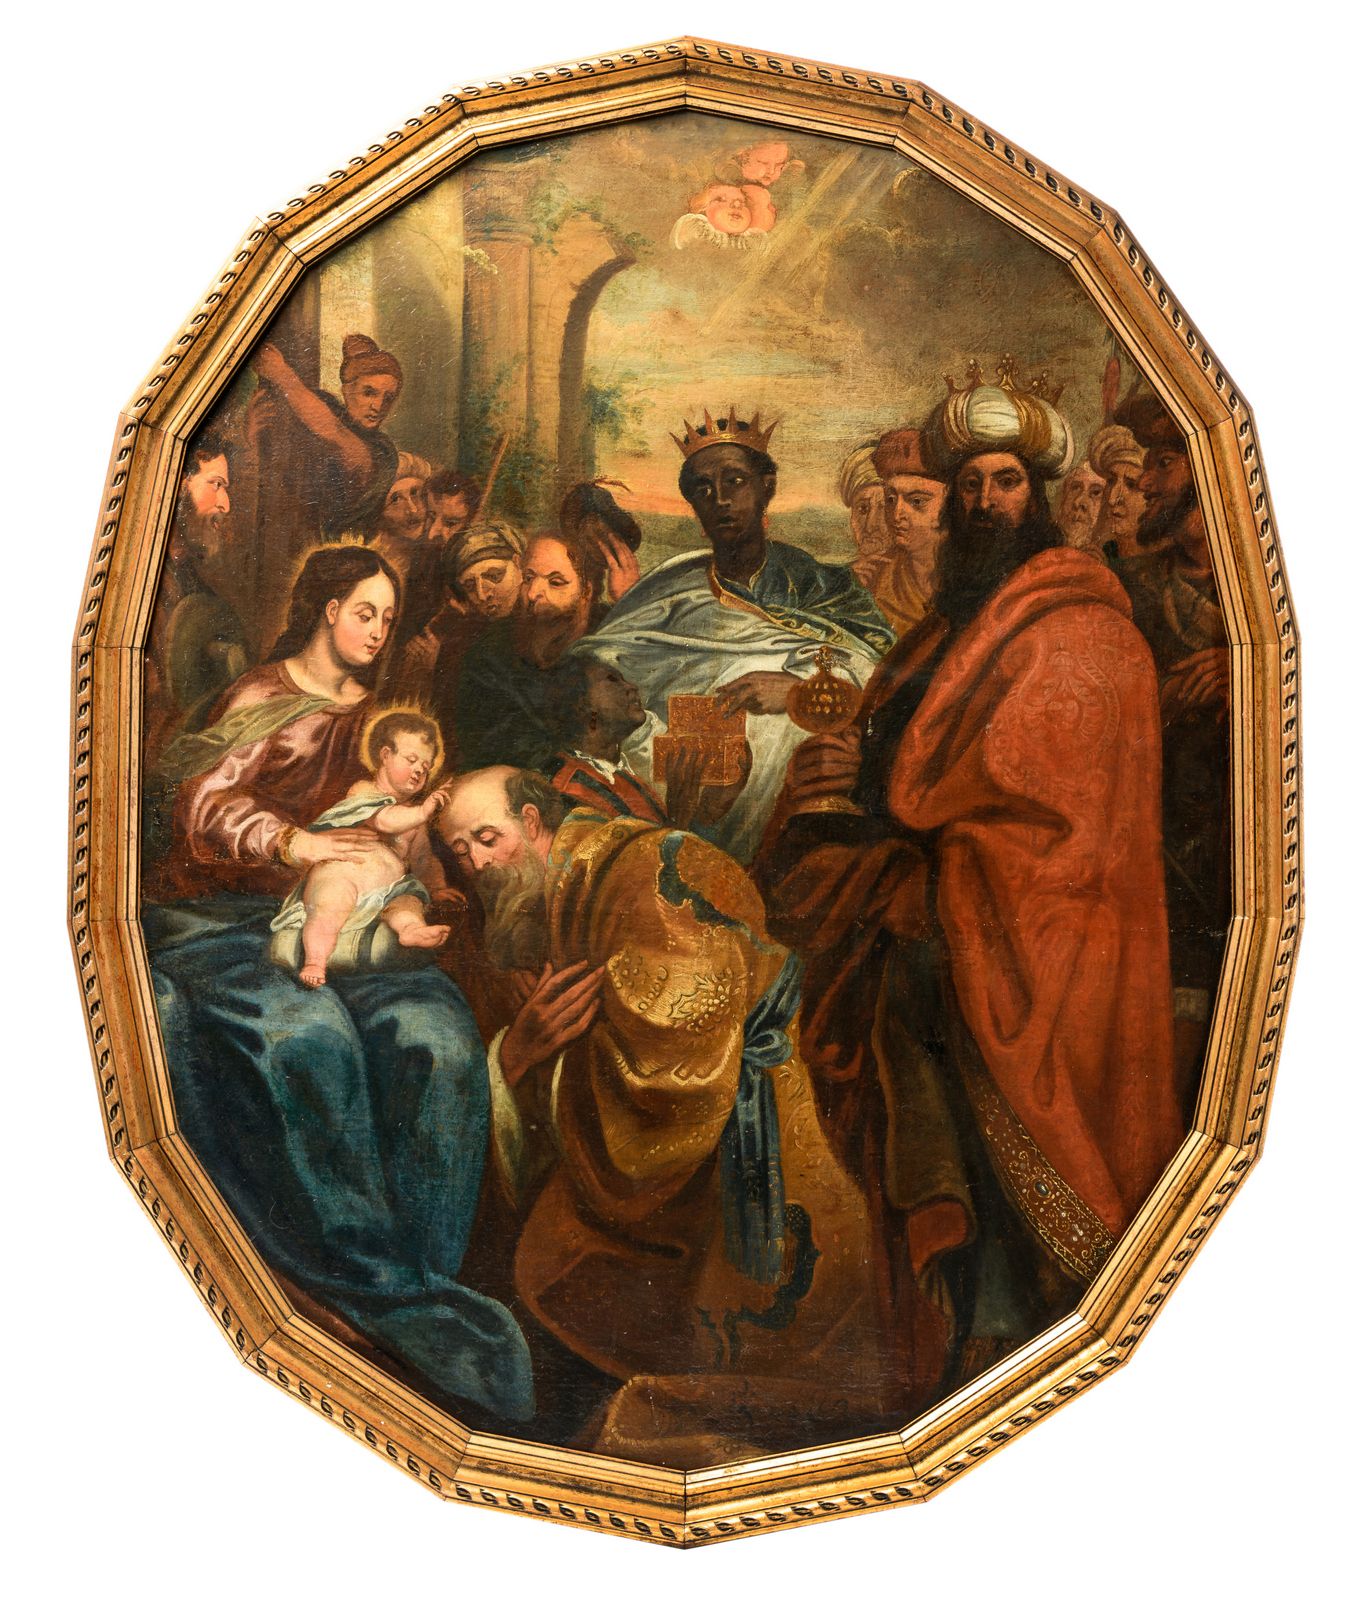 Unsigned, the Adoration of the Magi, oil on canvas, 17thC, the Southern Netherlands, 107 x 133 cm - Image 2 of 5